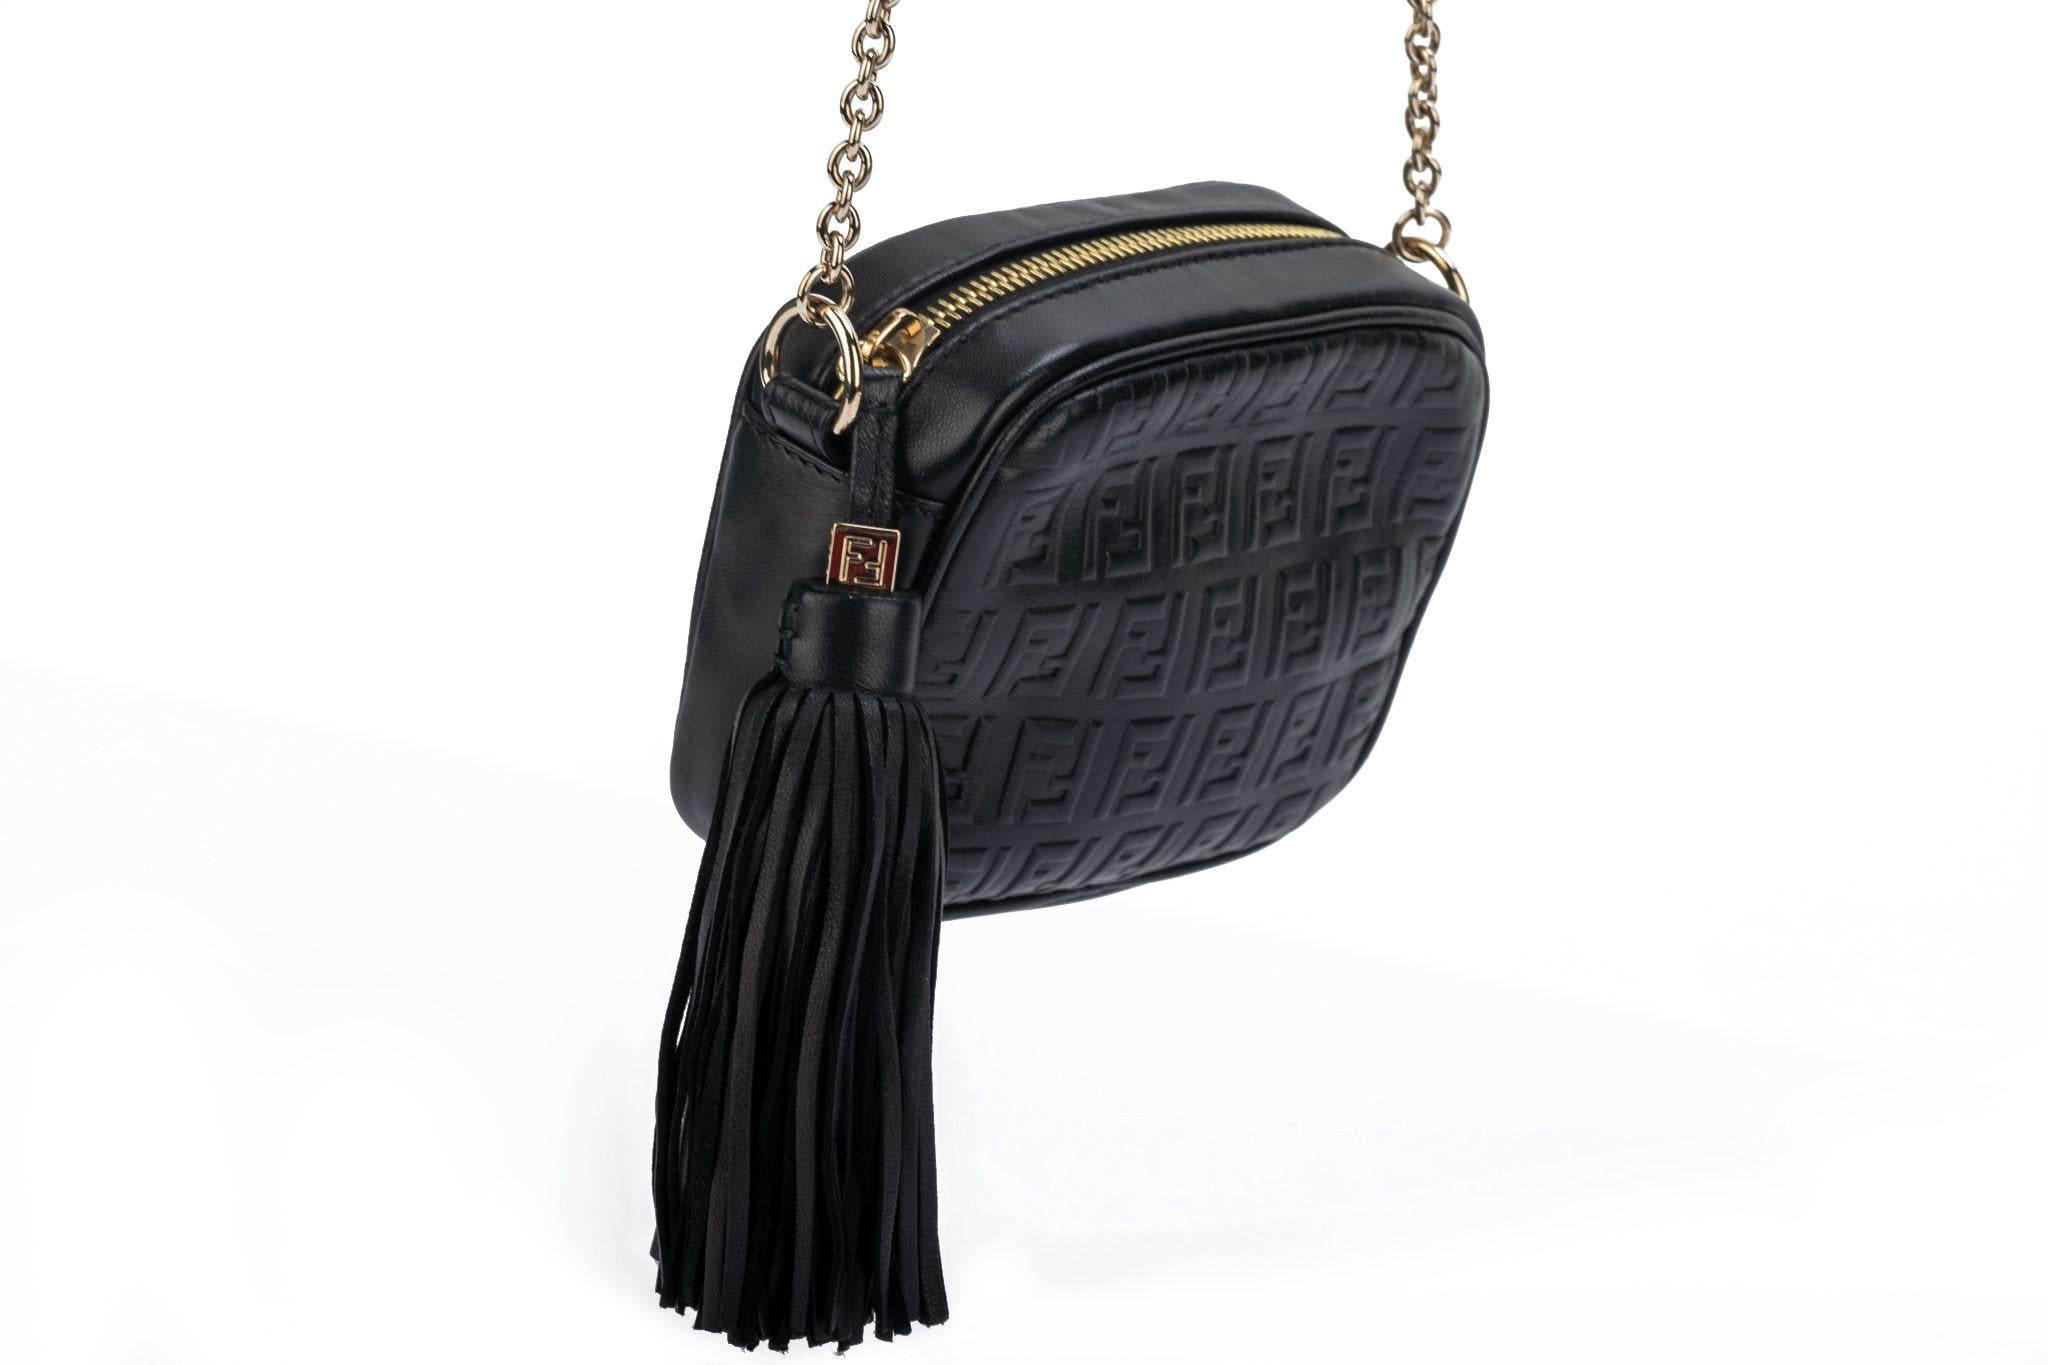 Fendi Black Embossed Camera Bag W Tassel In Excellent Condition For Sale In West Hollywood, CA